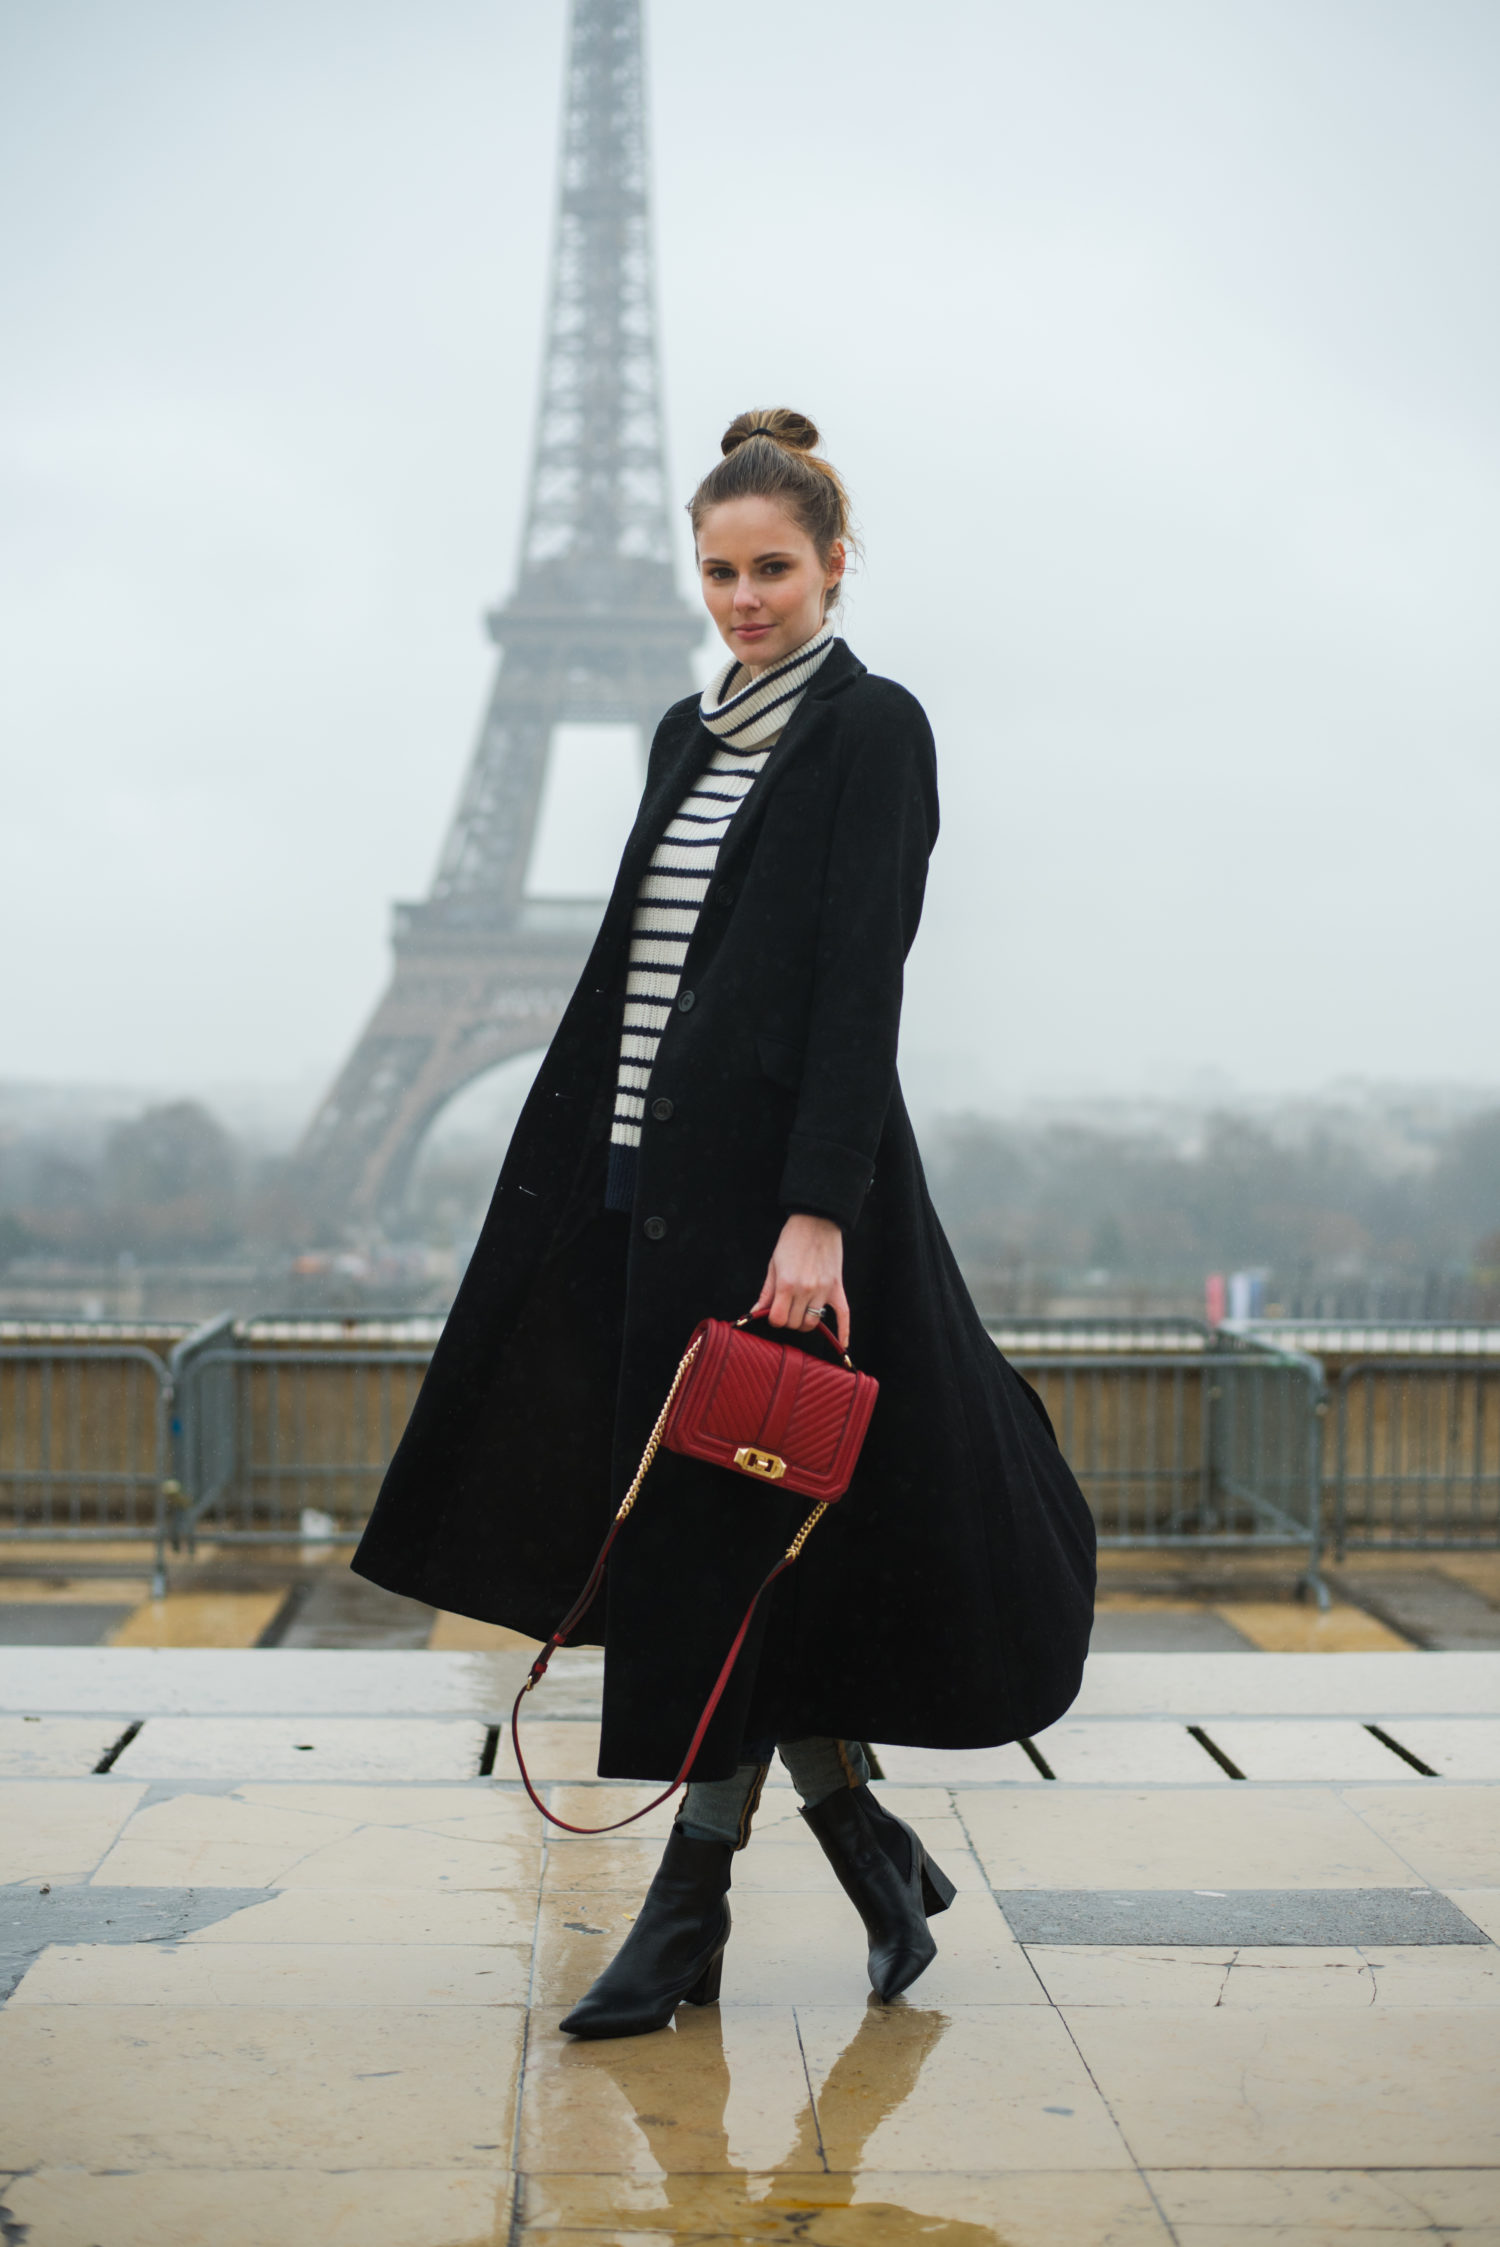 Miss USA 2011 Alyssa Campanella of The A List blog visits Paris, France wearing Rebecca Minkoff Quilted Chevron Bag